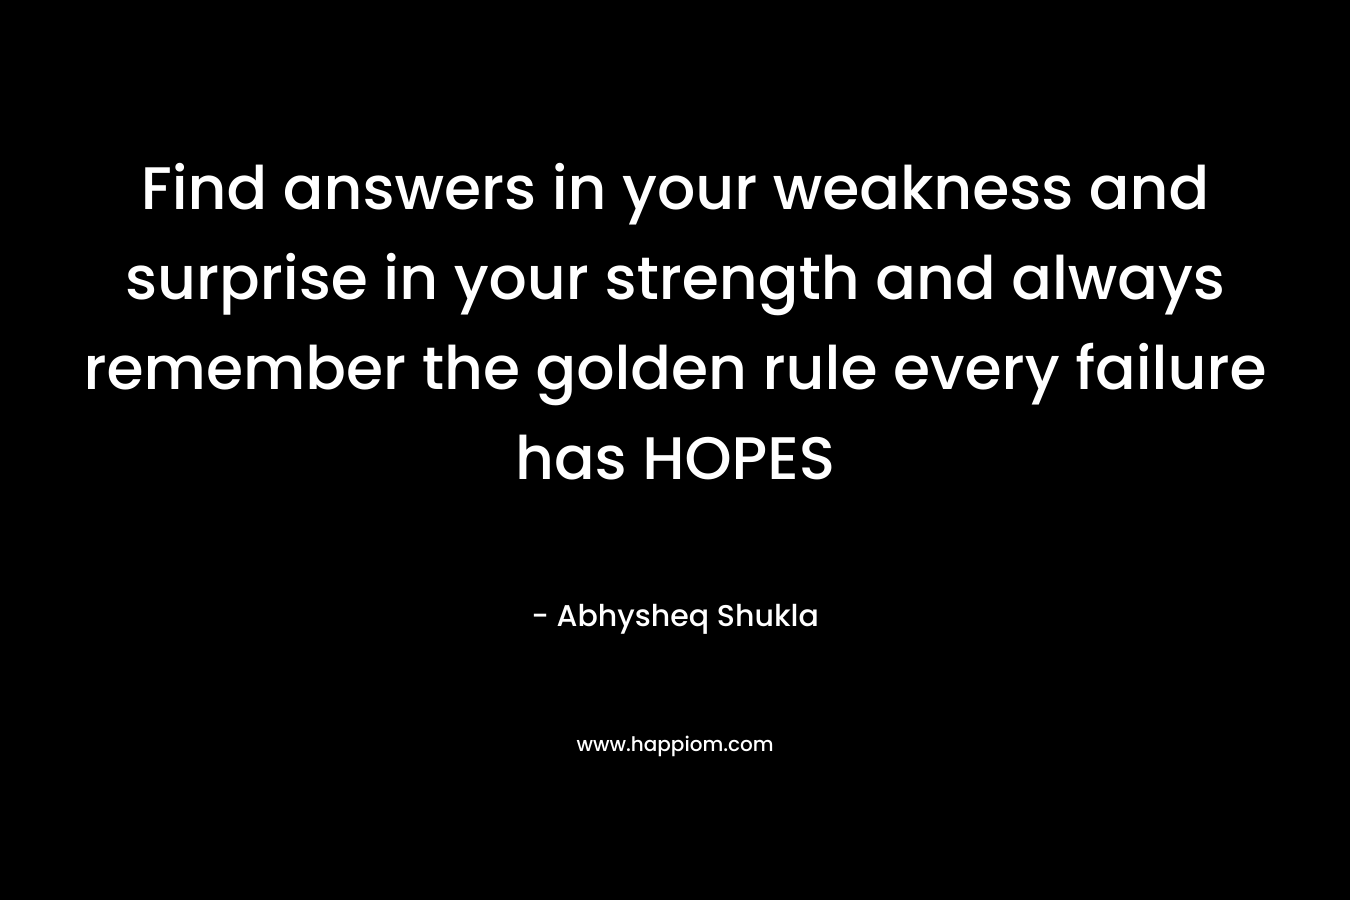 Find answers in your weakness and surprise in your strength and always remember the golden rule every failure has HOPES